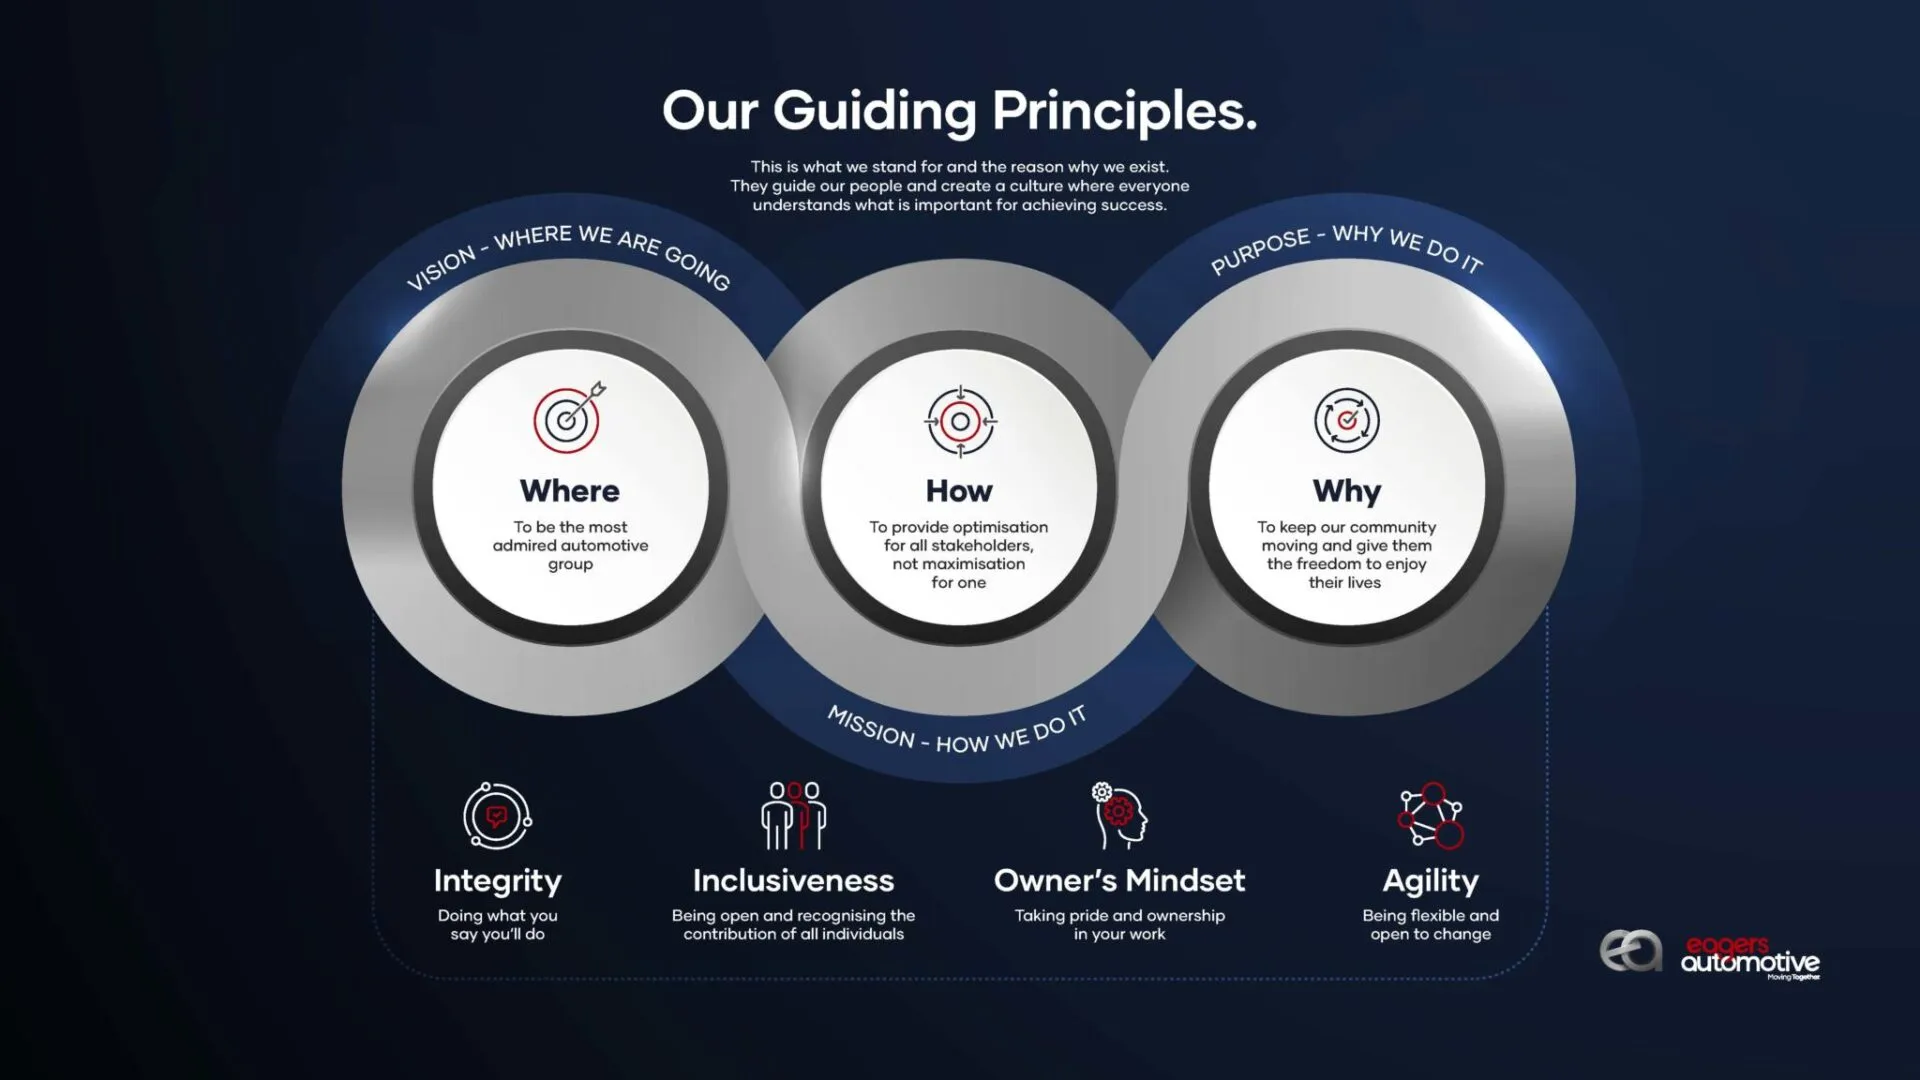 PPJ016763-EAGERS-Our-guiding-Principles-2048x1152